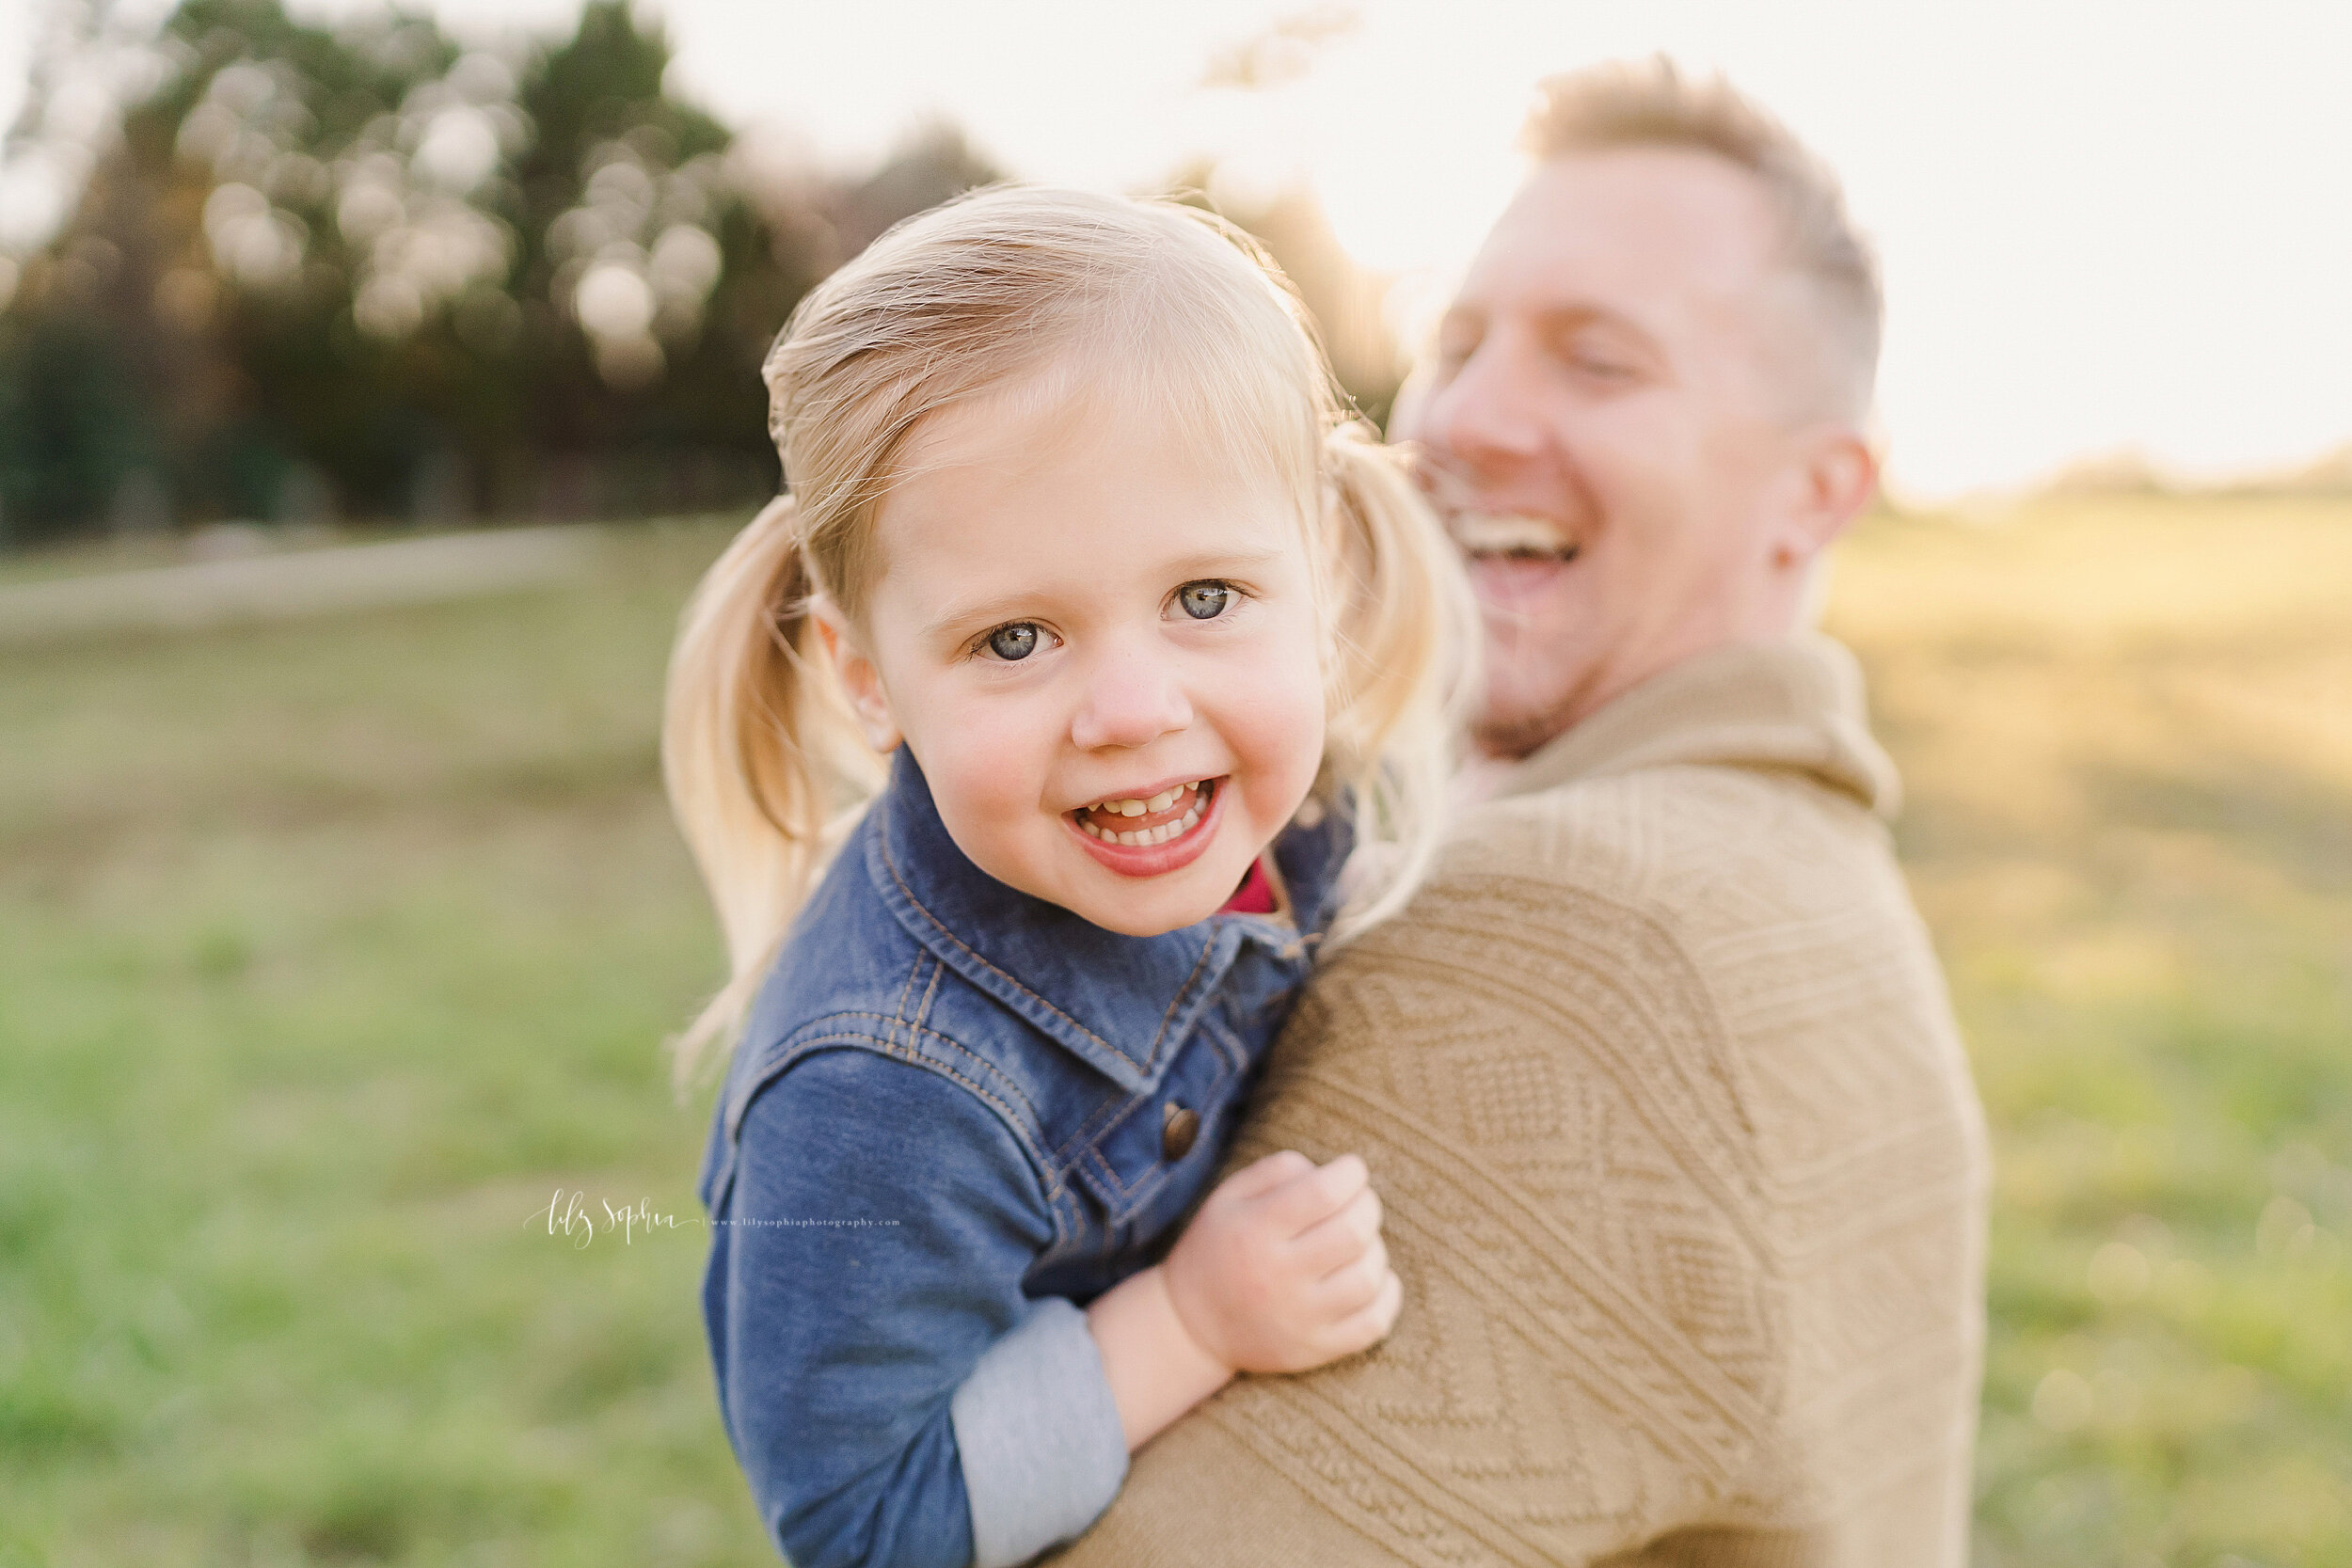  Family photo of a smiling blond haired, blue eyed little girl with pig tails in her hair as she is held in her dad’s arms in a field at sunset in Atlanta, Georgia. 